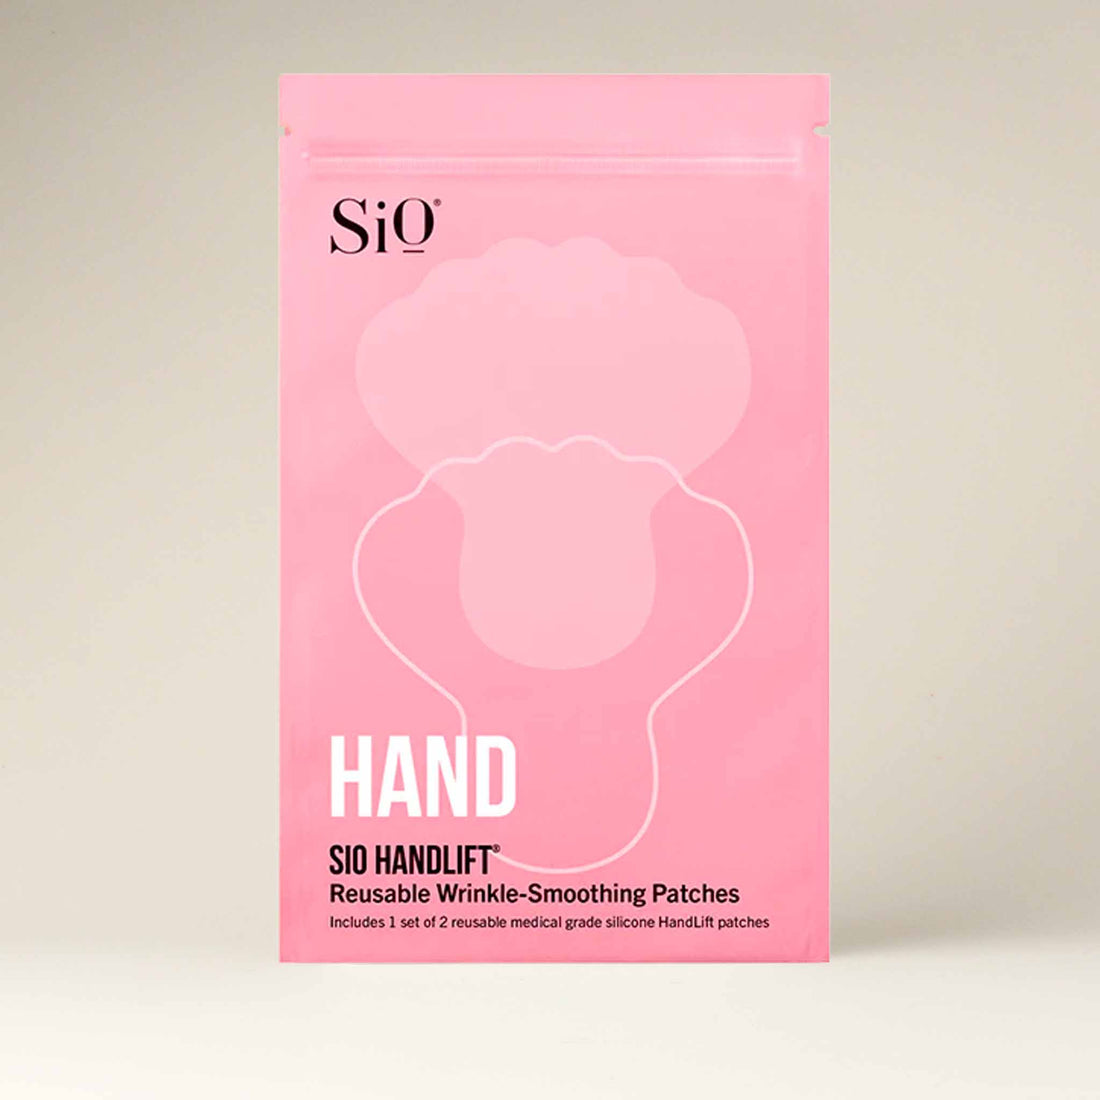 HandLift Wrinkle-Smoothing Patches